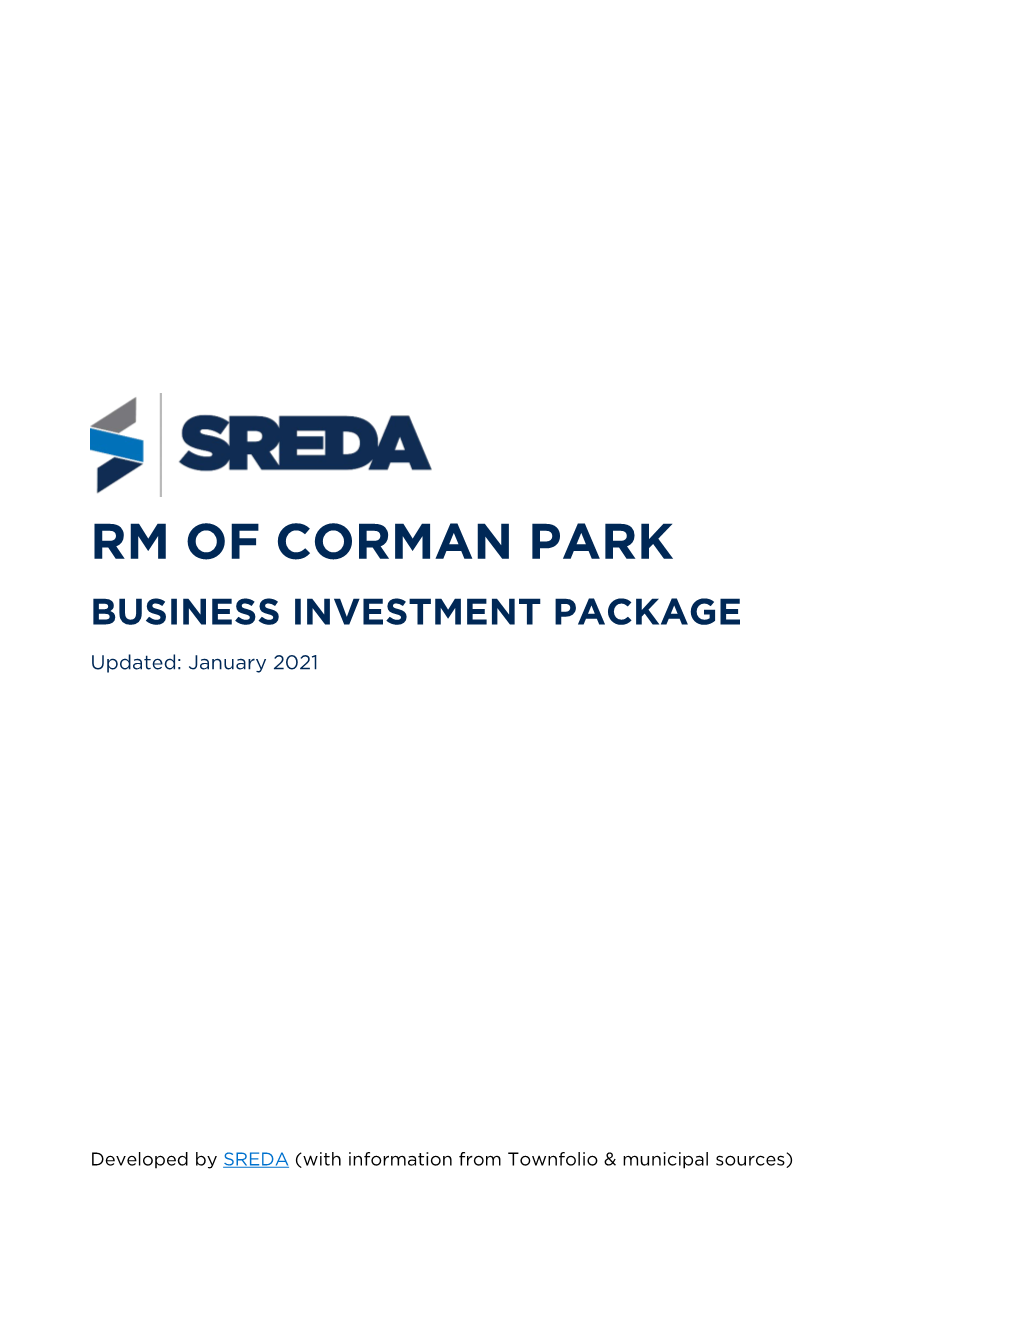 RM of CORMAN PARK BUSINESS INVESTMENT PACKAGE Updated: January 2021